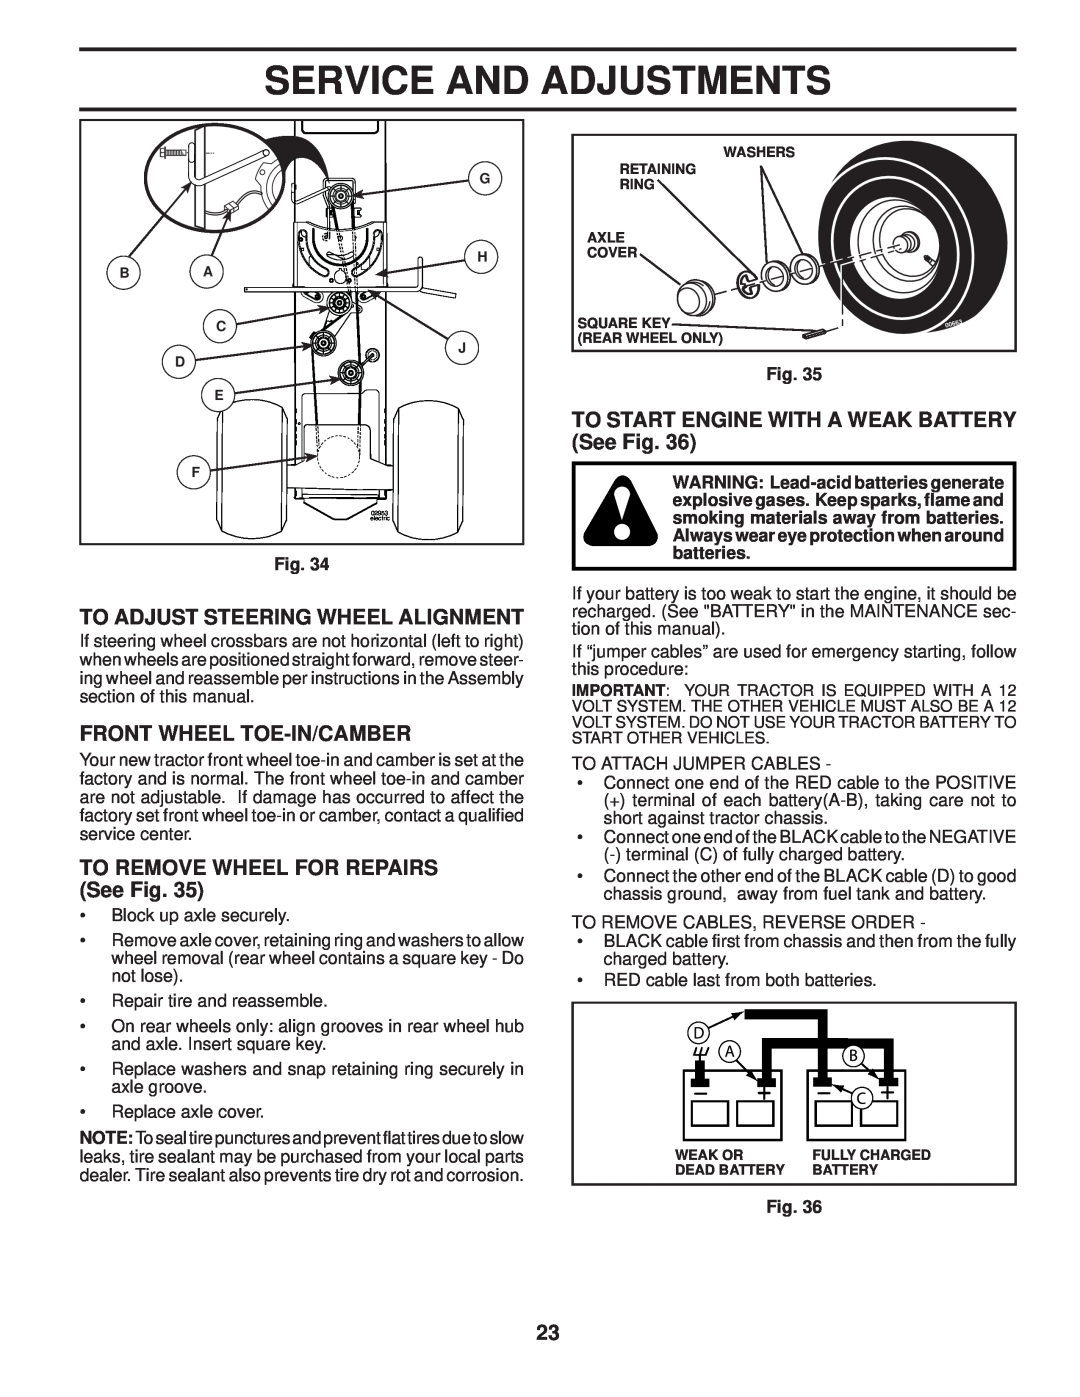 Poulan PPH23B48 manual To Adjust Steering Wheel Alignment, Front Wheel Toe-In/Camber, TO REMOVE WHEEL FOR REPAIRS See Fig 